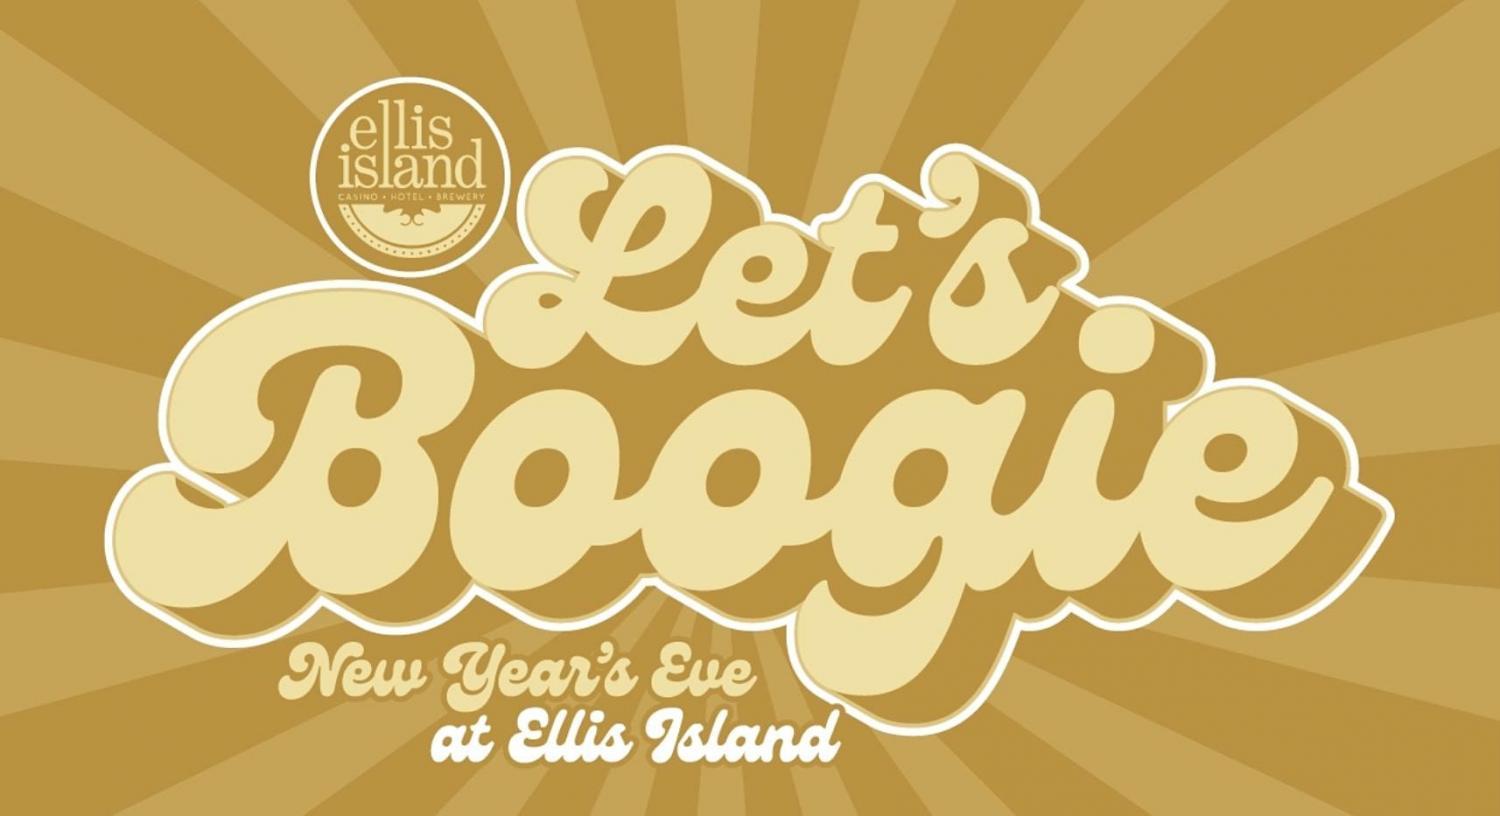 Let's Boogie! New Year's Eve at Ellis Island